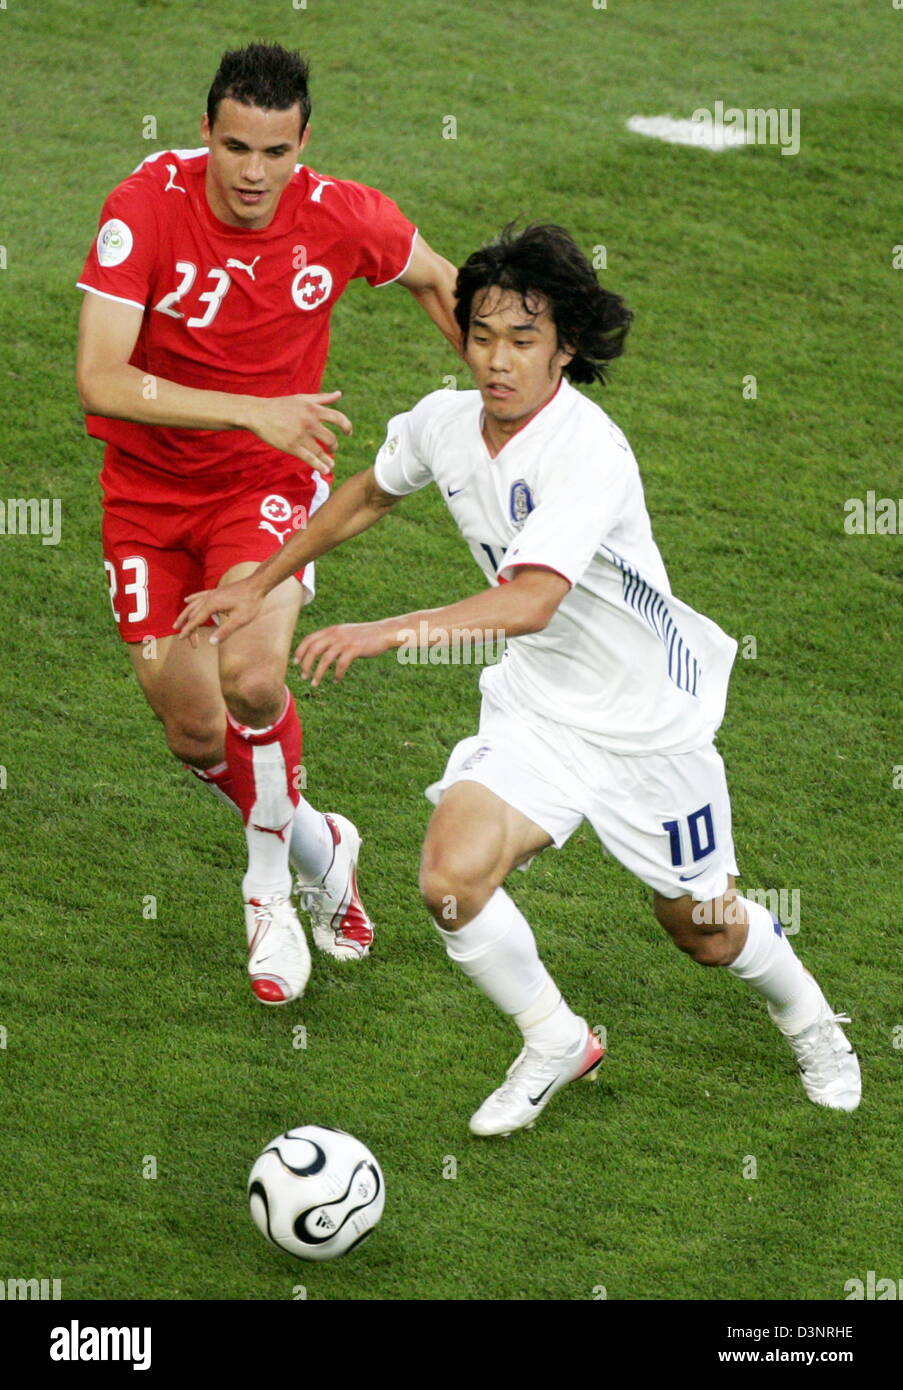 Swiss player Philipp Degen (L) vies with Chu Young Park (R) from Korea Republic during the group G preliminary round match of 2006 FIFA World Cup between Switzerland and Republic Korea in Hanover, Germany, Friday, 23 June 2006. DPA/RAINER JENSEN +++ Mobile Services OUT +++ Please also refer to FIFA's Terms and Conditions. Stock Photo